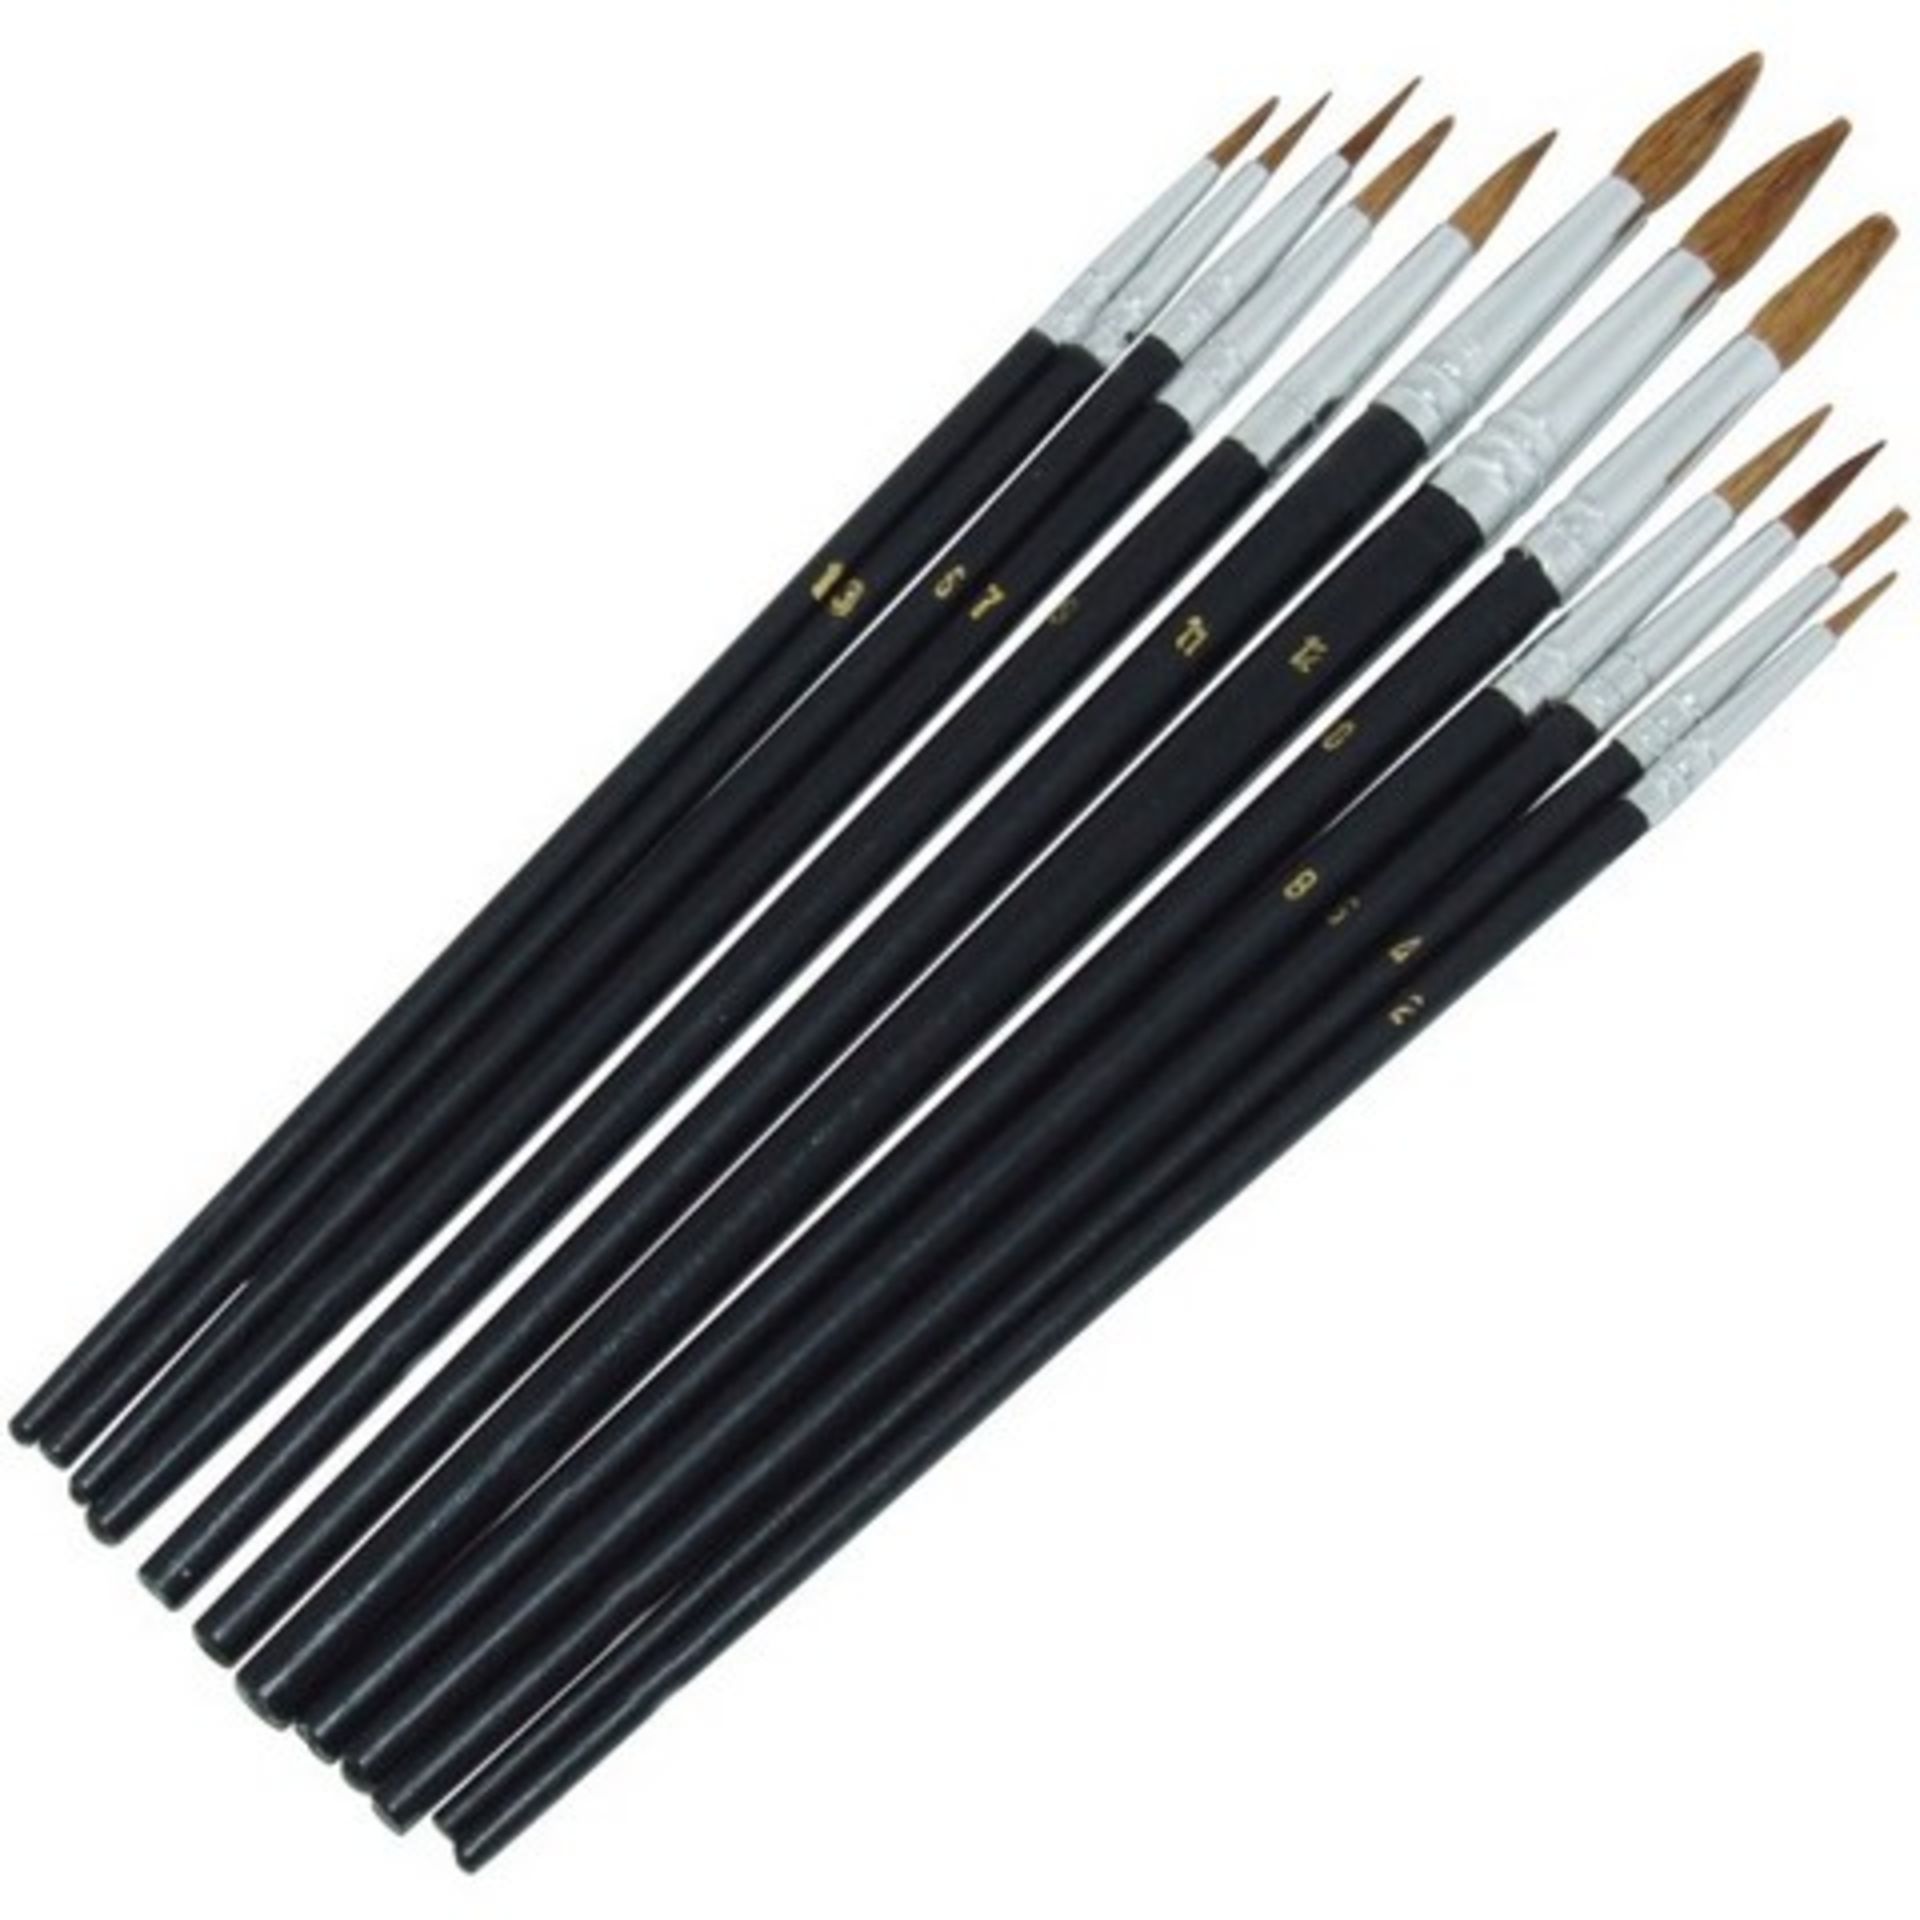 V Brand New 15pc Paint Brush Set Being Suitable For Watercolours And Oils/Model Making Etc - Image 2 of 2